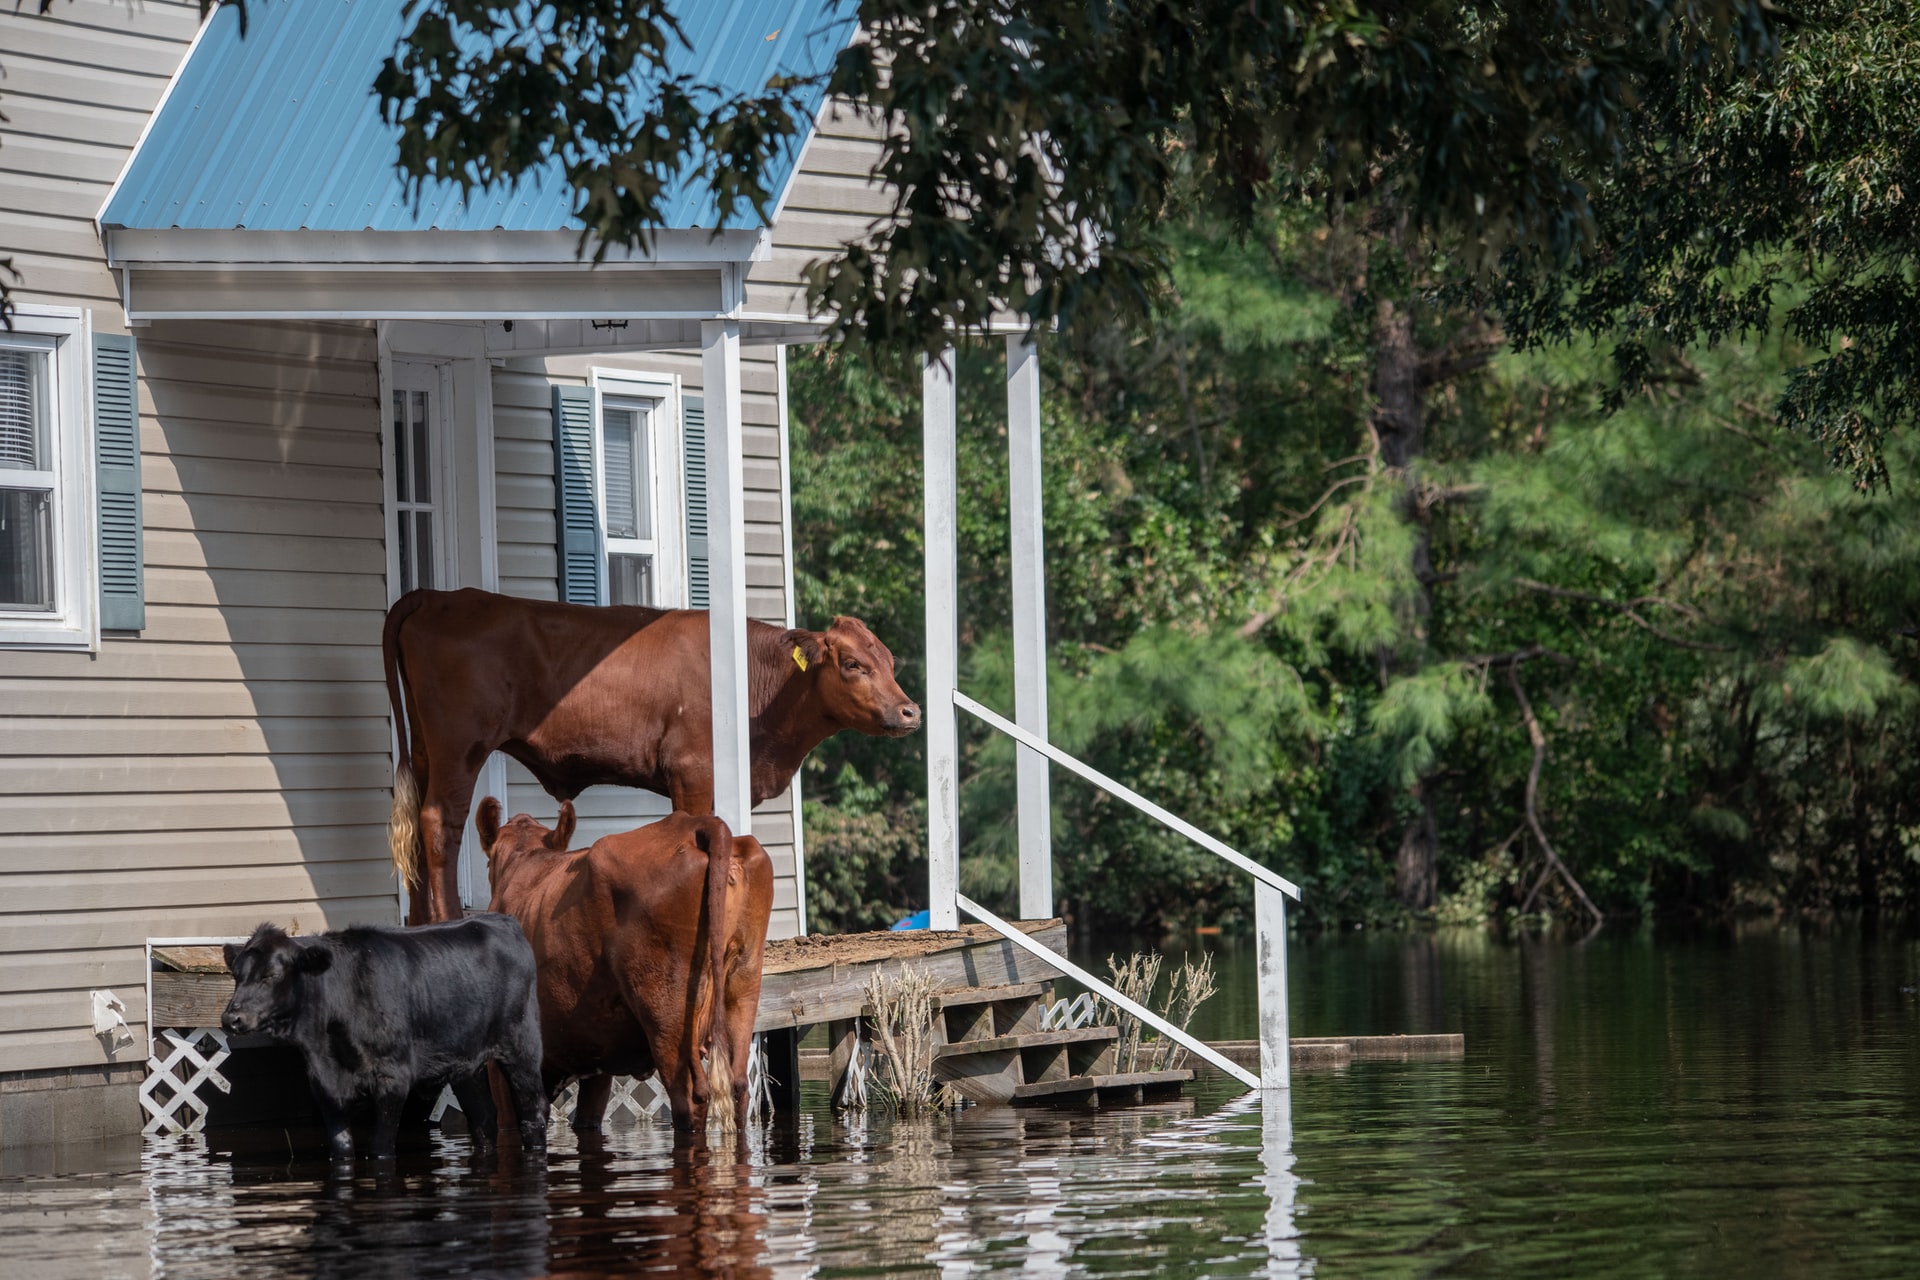 Flash floods are rare, but deadly. Here’s how to be ready for them.